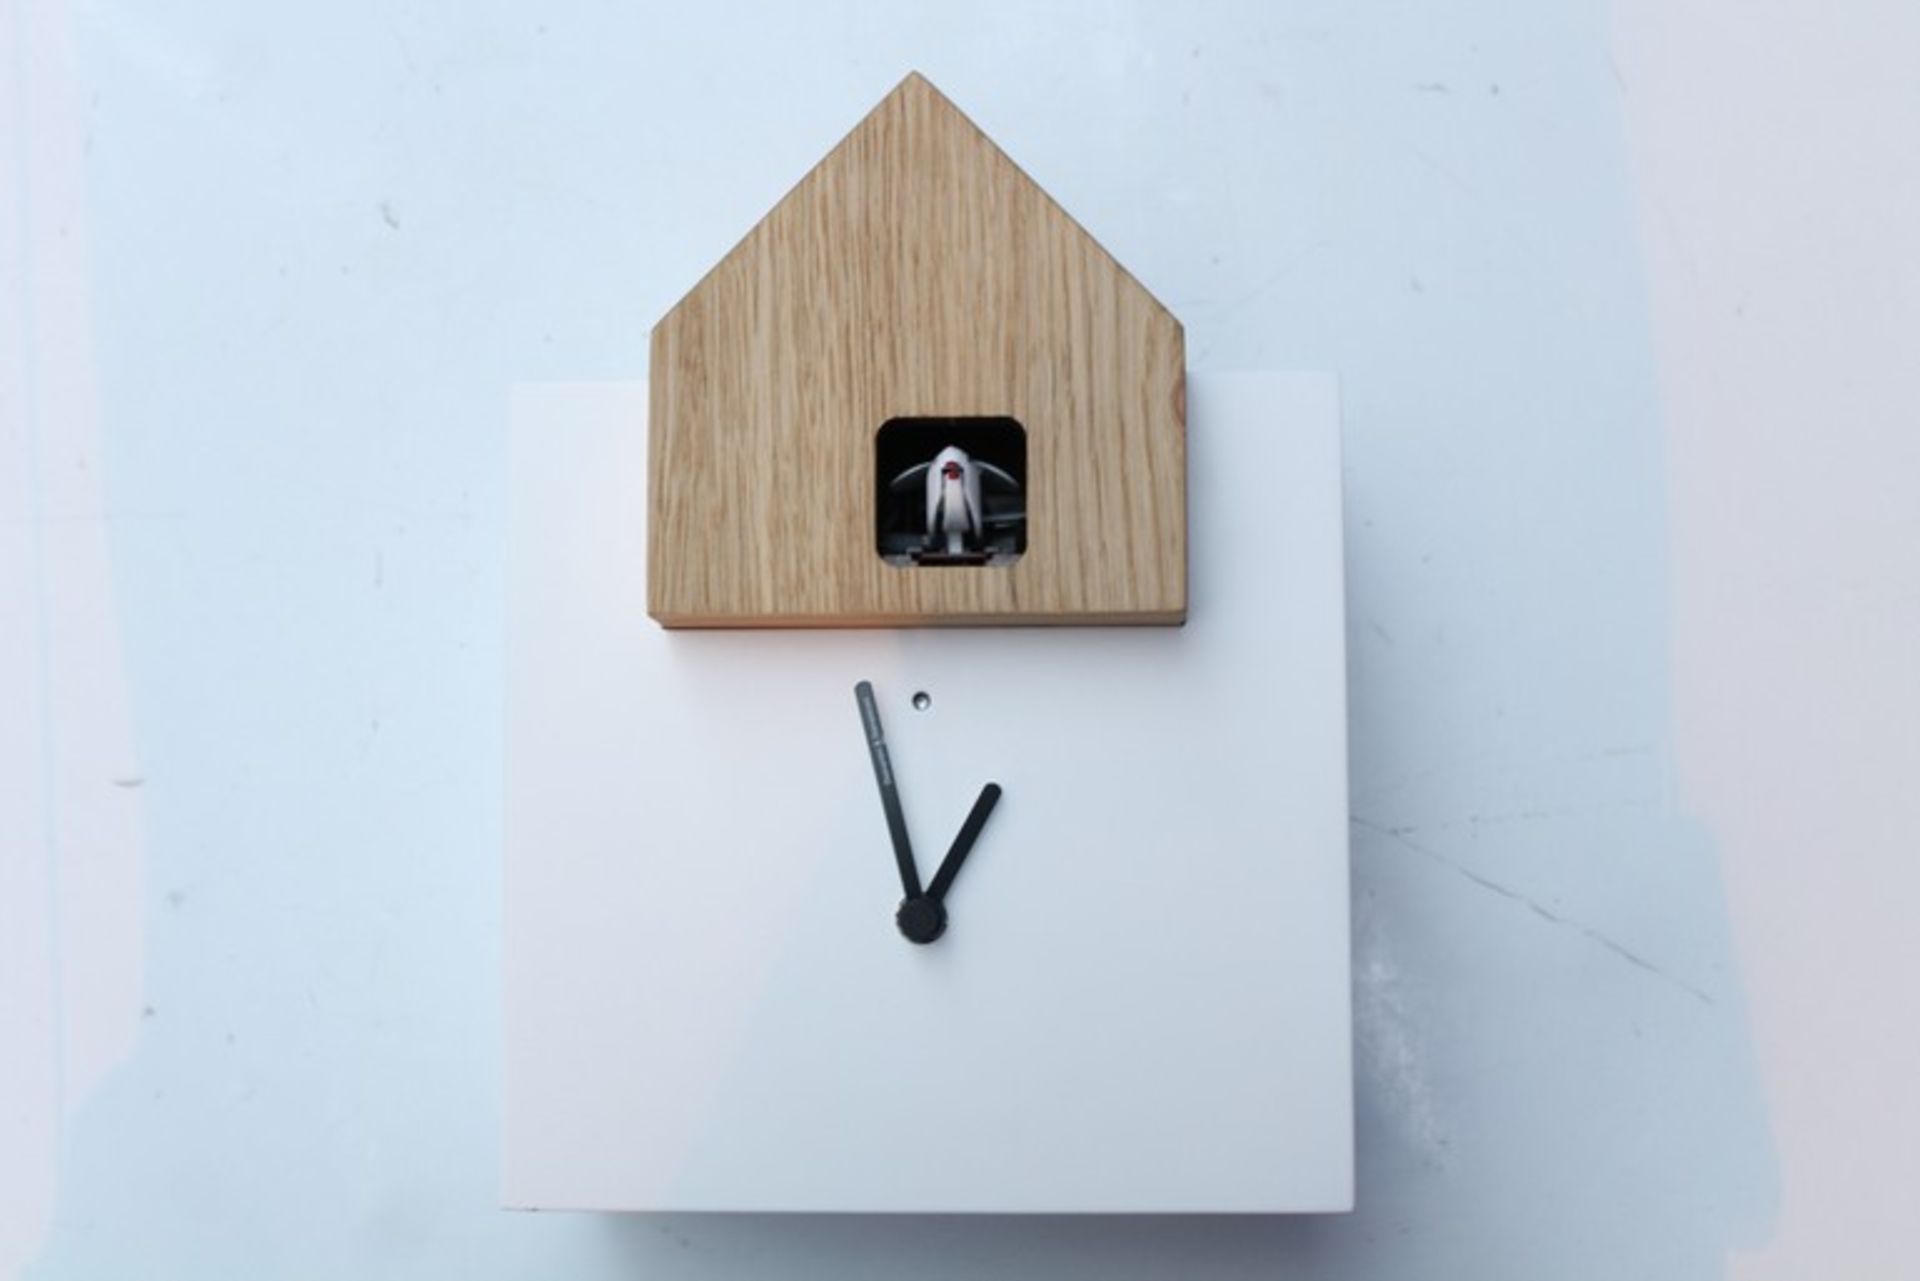 1 x BOXED ARIANA CUCKOO CLOCK RRP £200  *PLEASE NOTE THAT THE BID PRICE IS MULTIPLIED BY THE